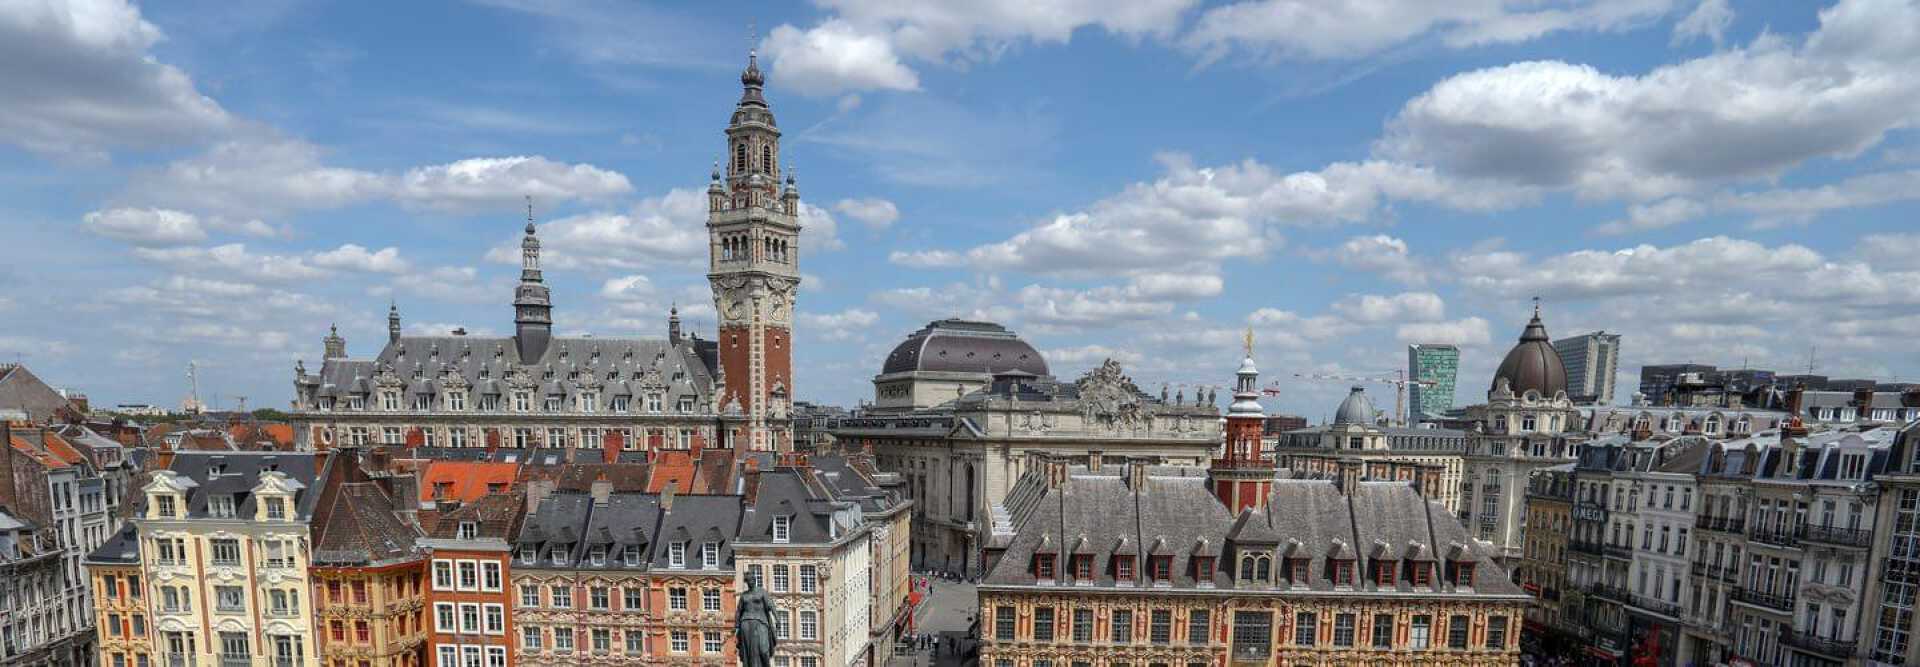 Aerial view of the roofs of the city of Lille in France under a cloudy sky